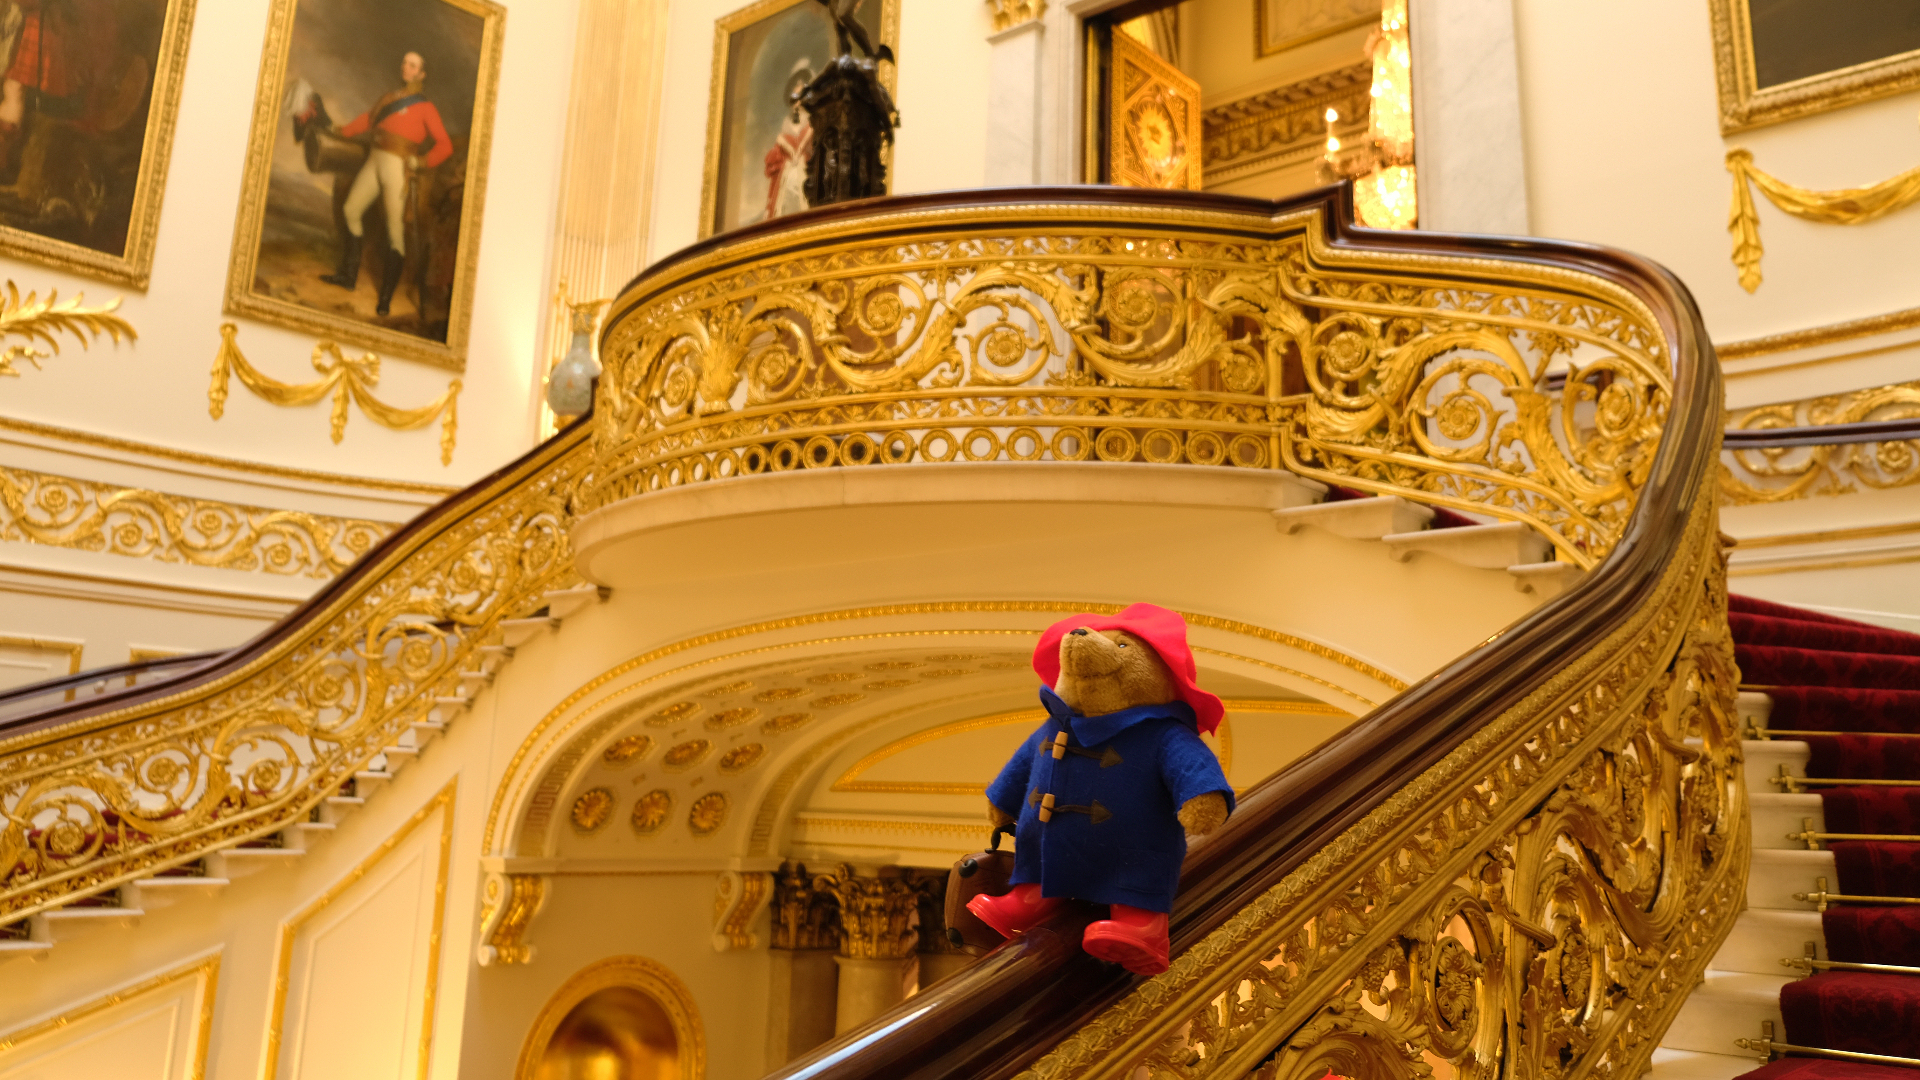 More than 1,000 Paddingtons and teddy bears will be donated to the charity